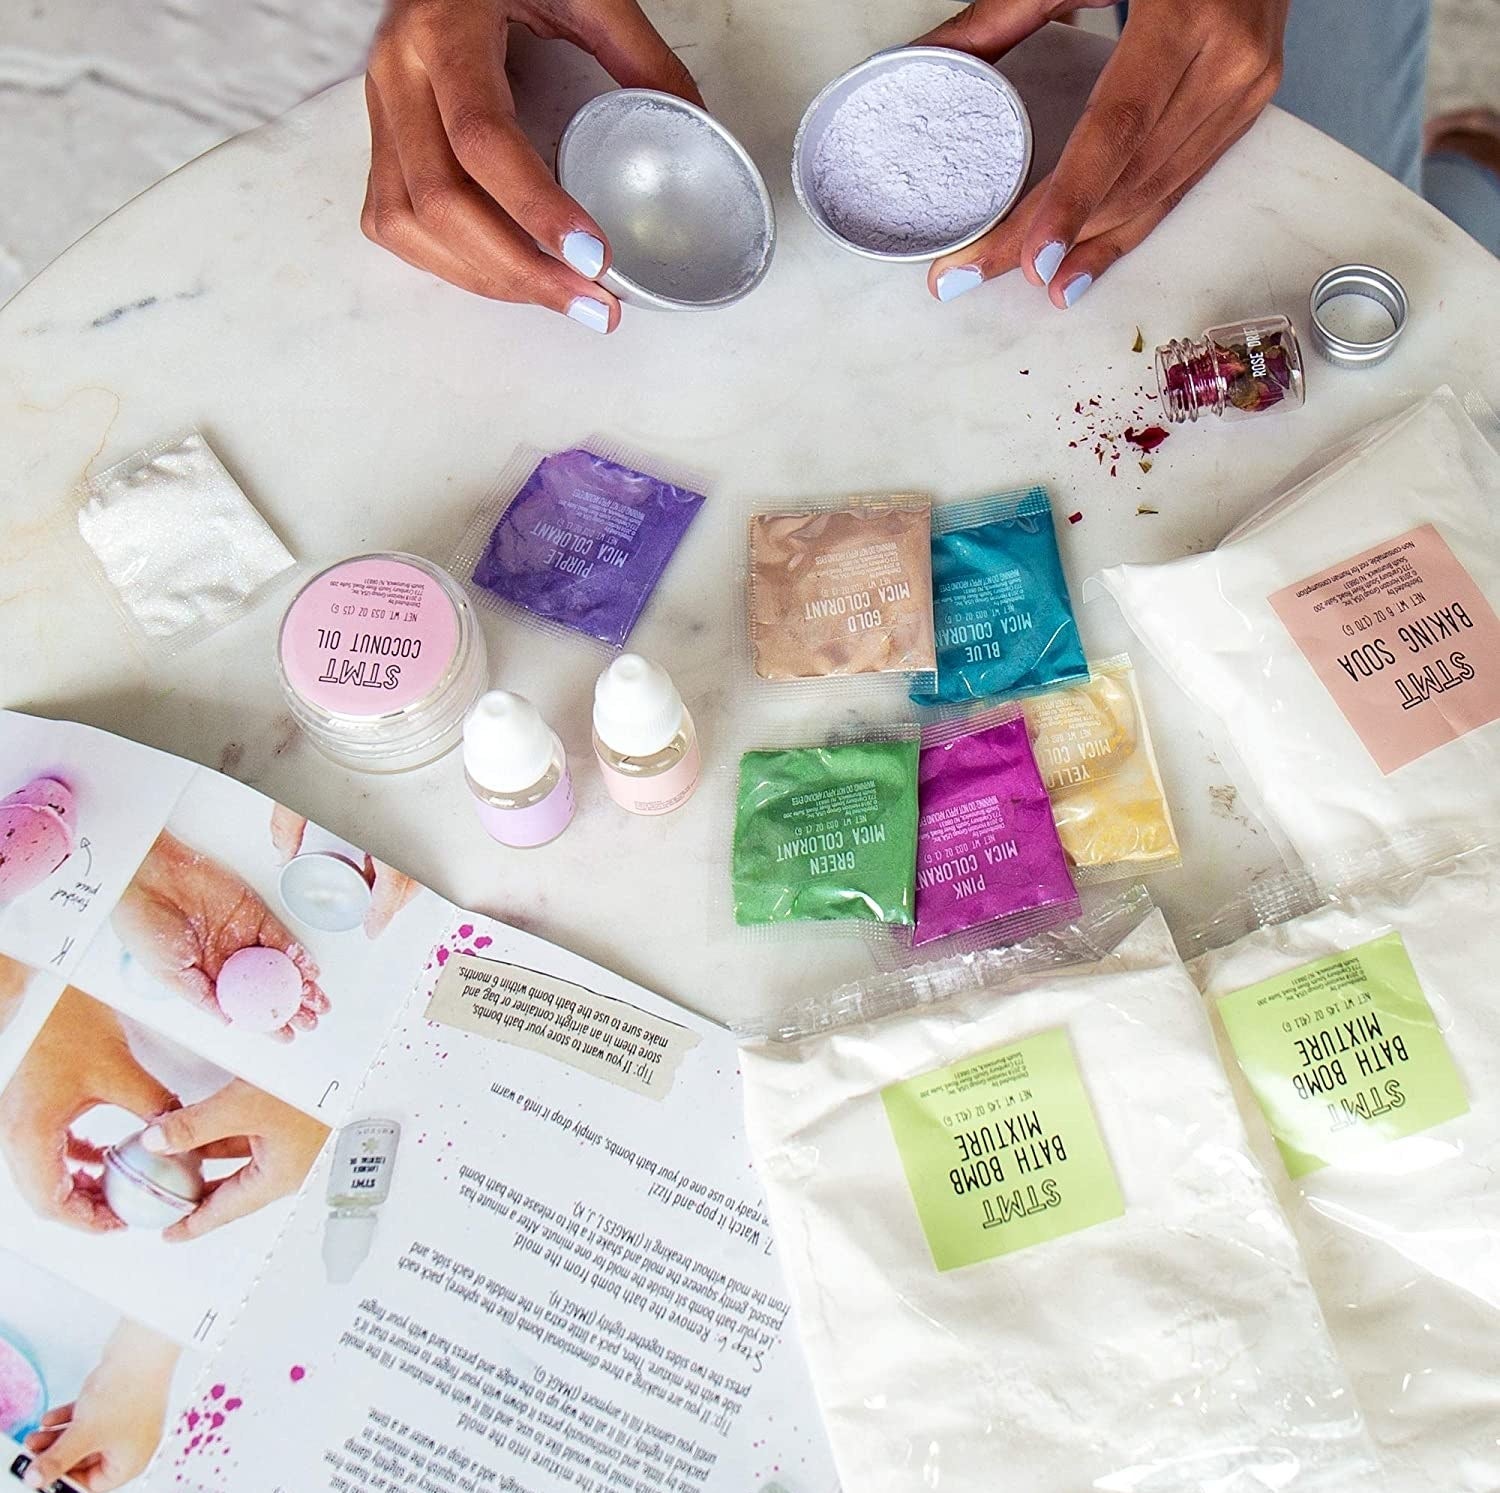 Model using an unboxed bath bomb kit with instruction manual on table